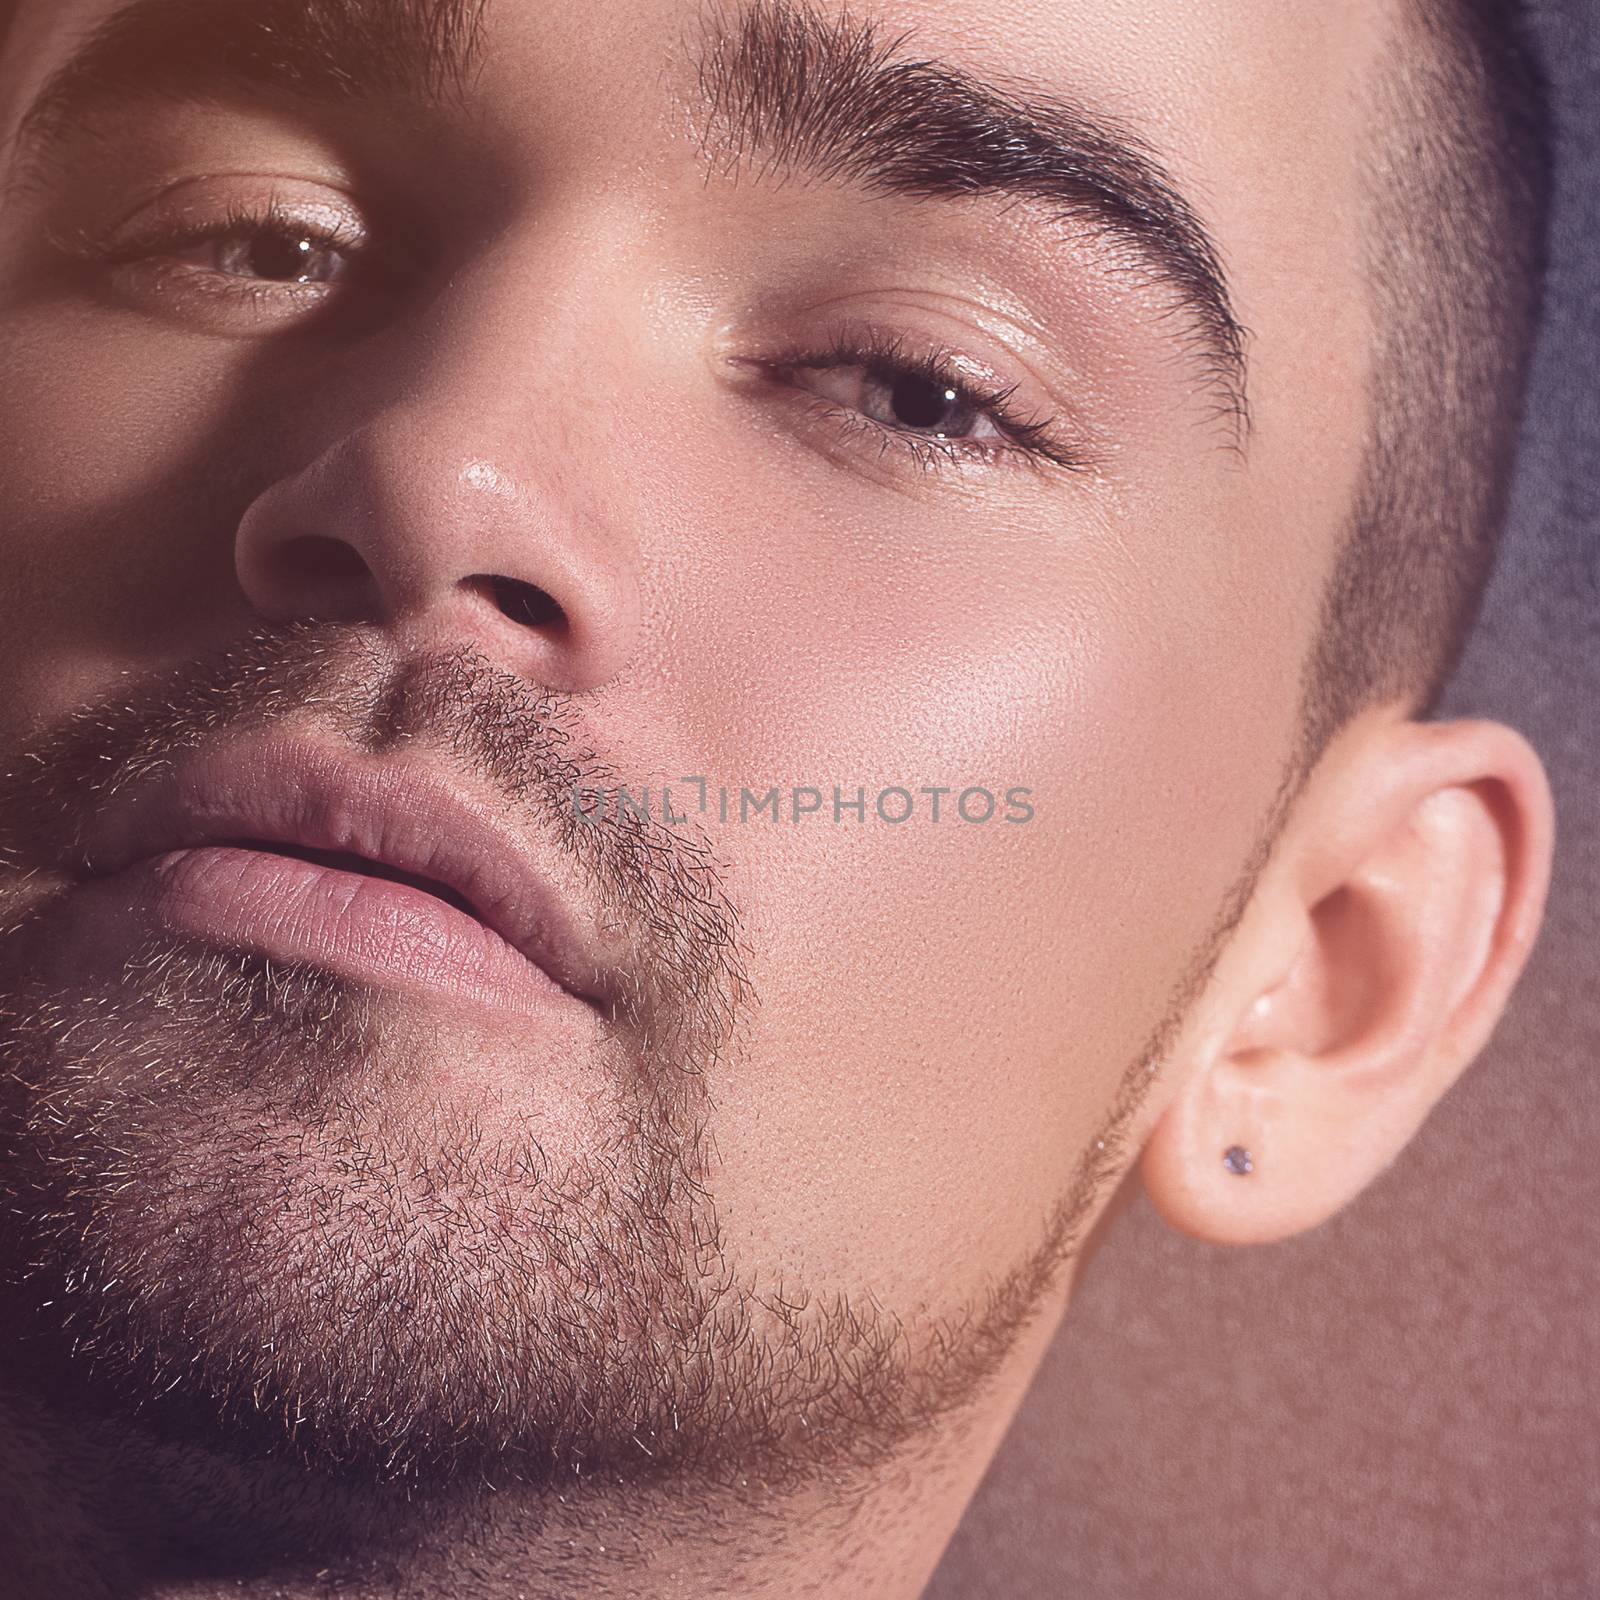 Closeup photo of a handsome man with a beard and an earring